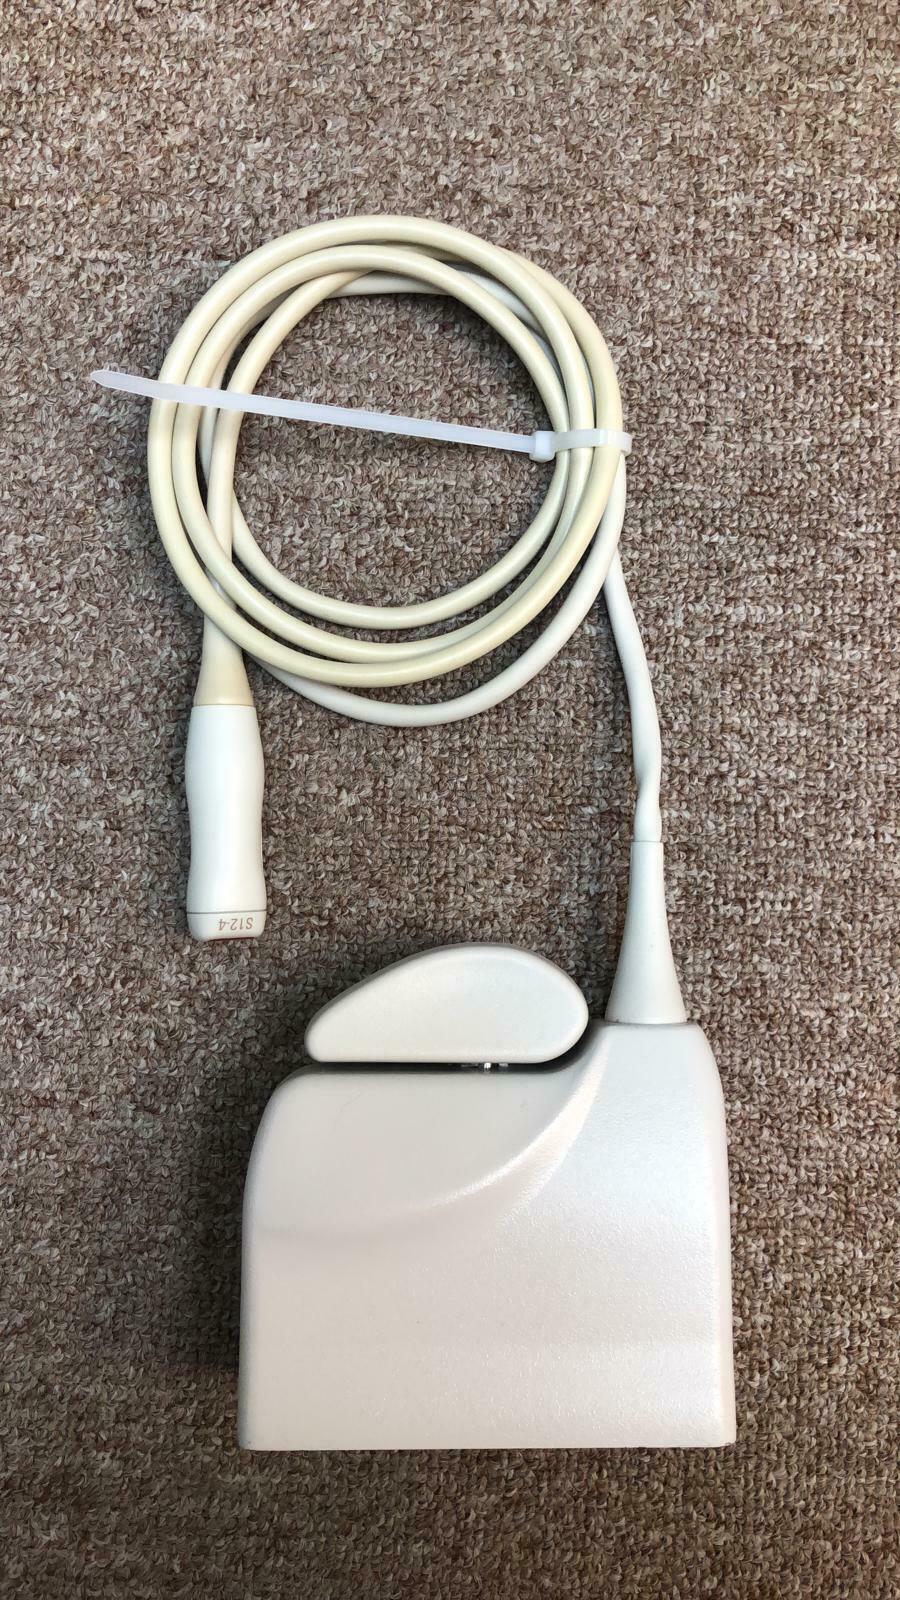 PHILIPS S12-4 ULTRASOUND TRANSDUCER PROBE DIAGNOSTIC ULTRASOUND MACHINES FOR SALE